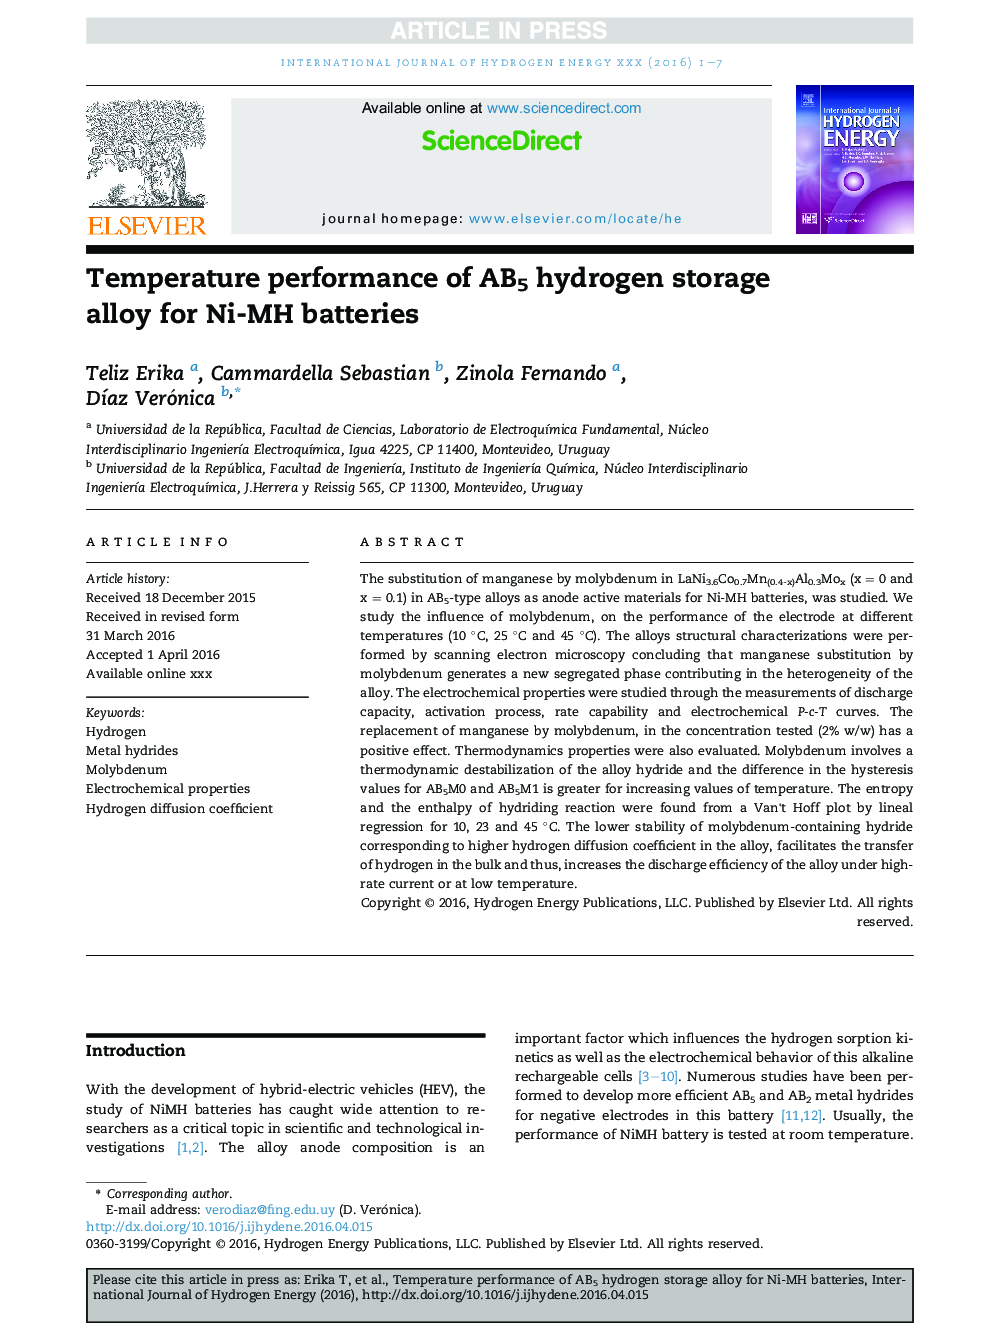 Temperature performance of AB5 hydrogen storage alloy for Ni-MH batteries